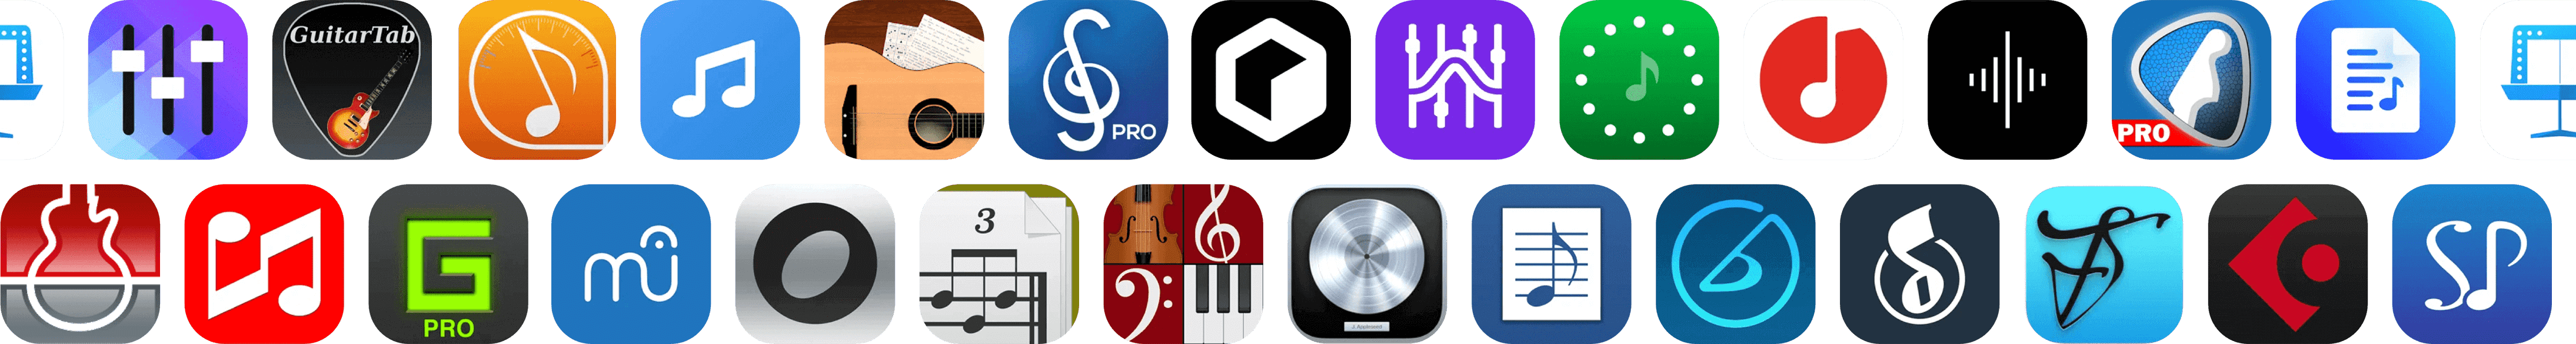 Works with all your favorite music apps.